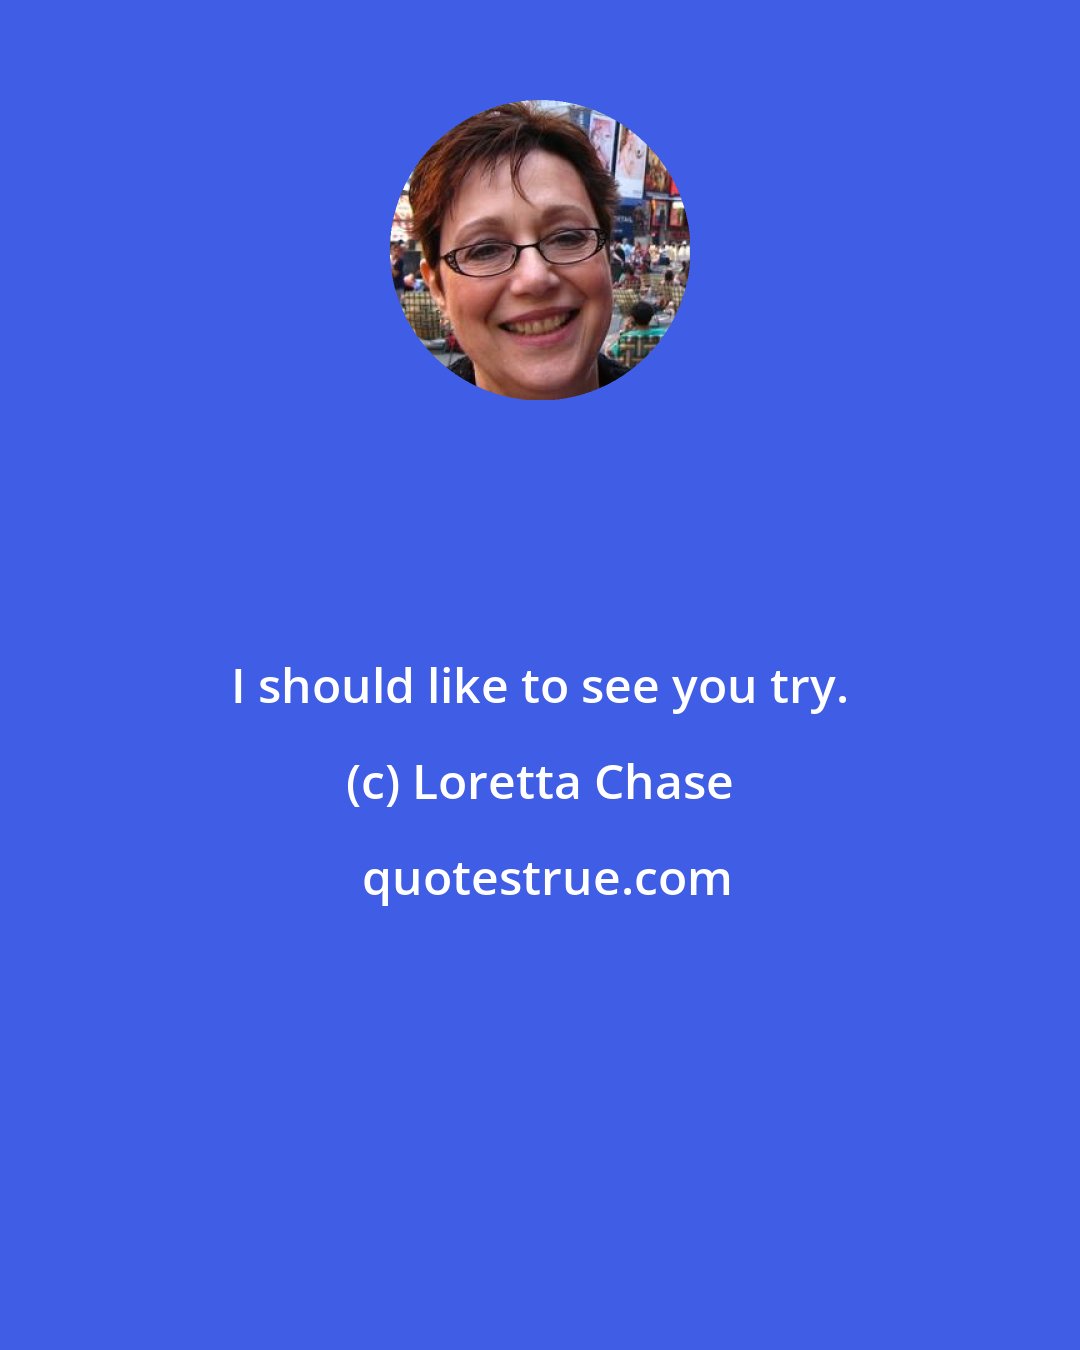 Loretta Chase: I should like to see you try.